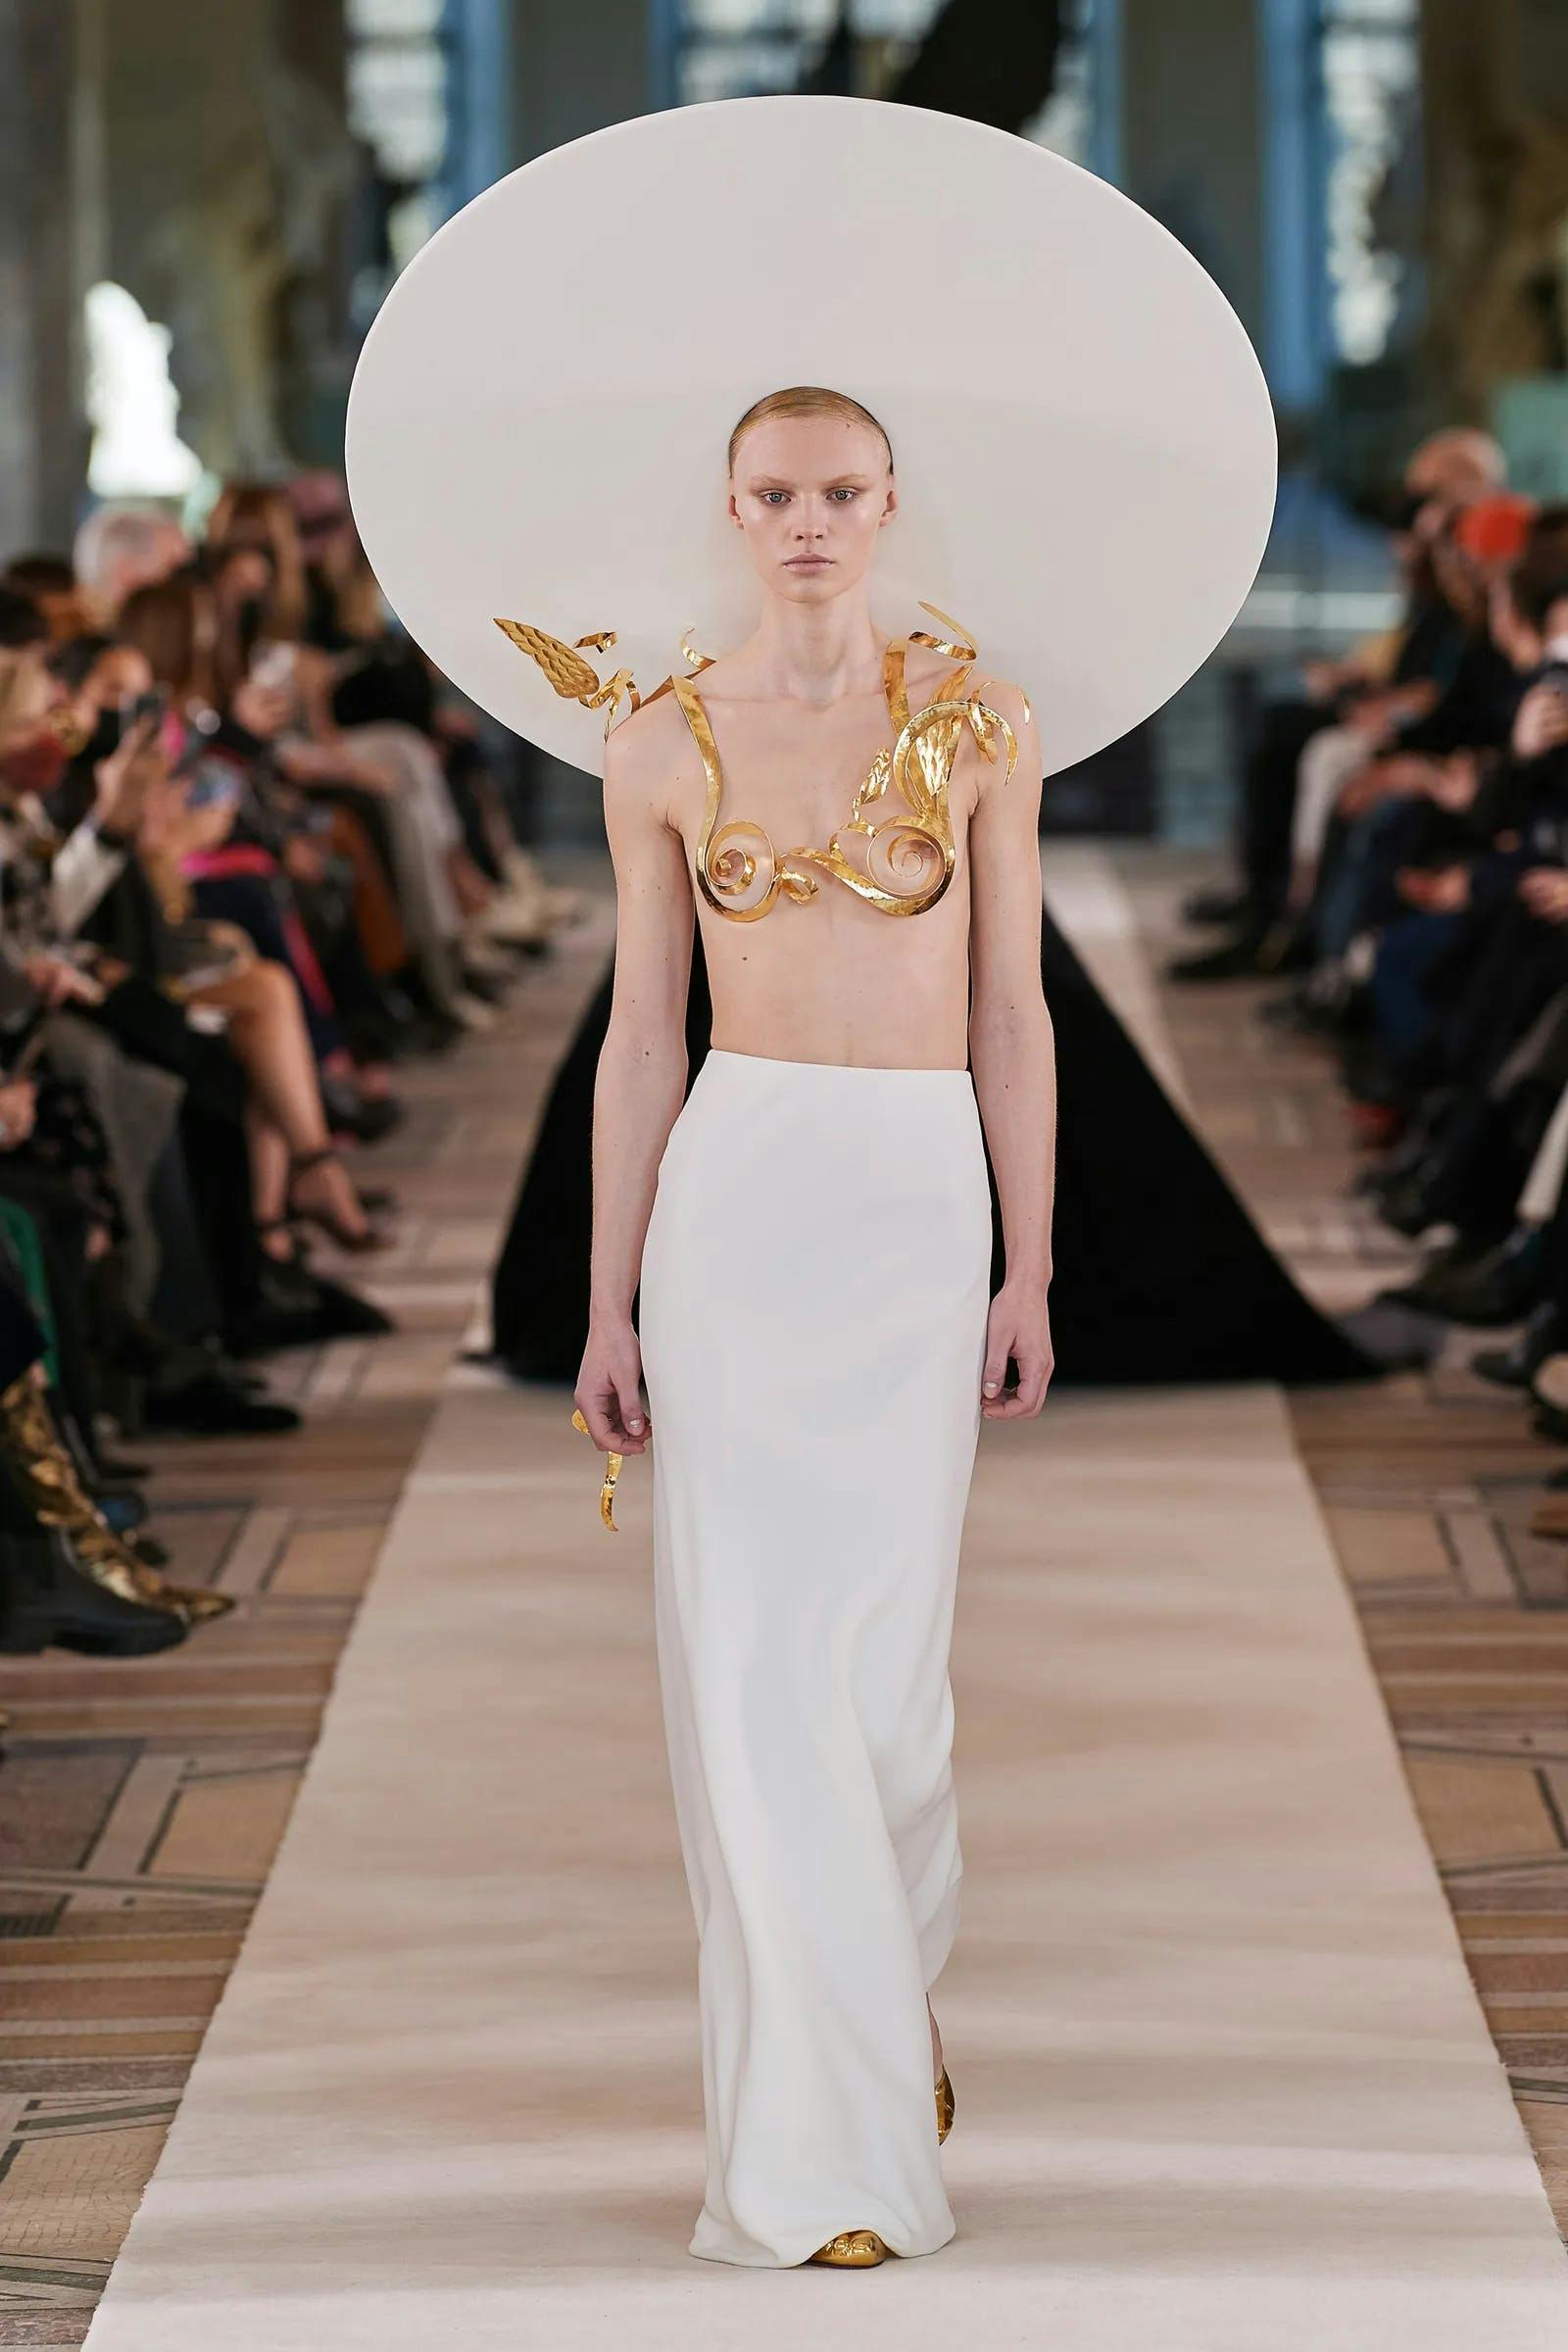 A model in a gold bra top and white skirt for Schiaparelli.